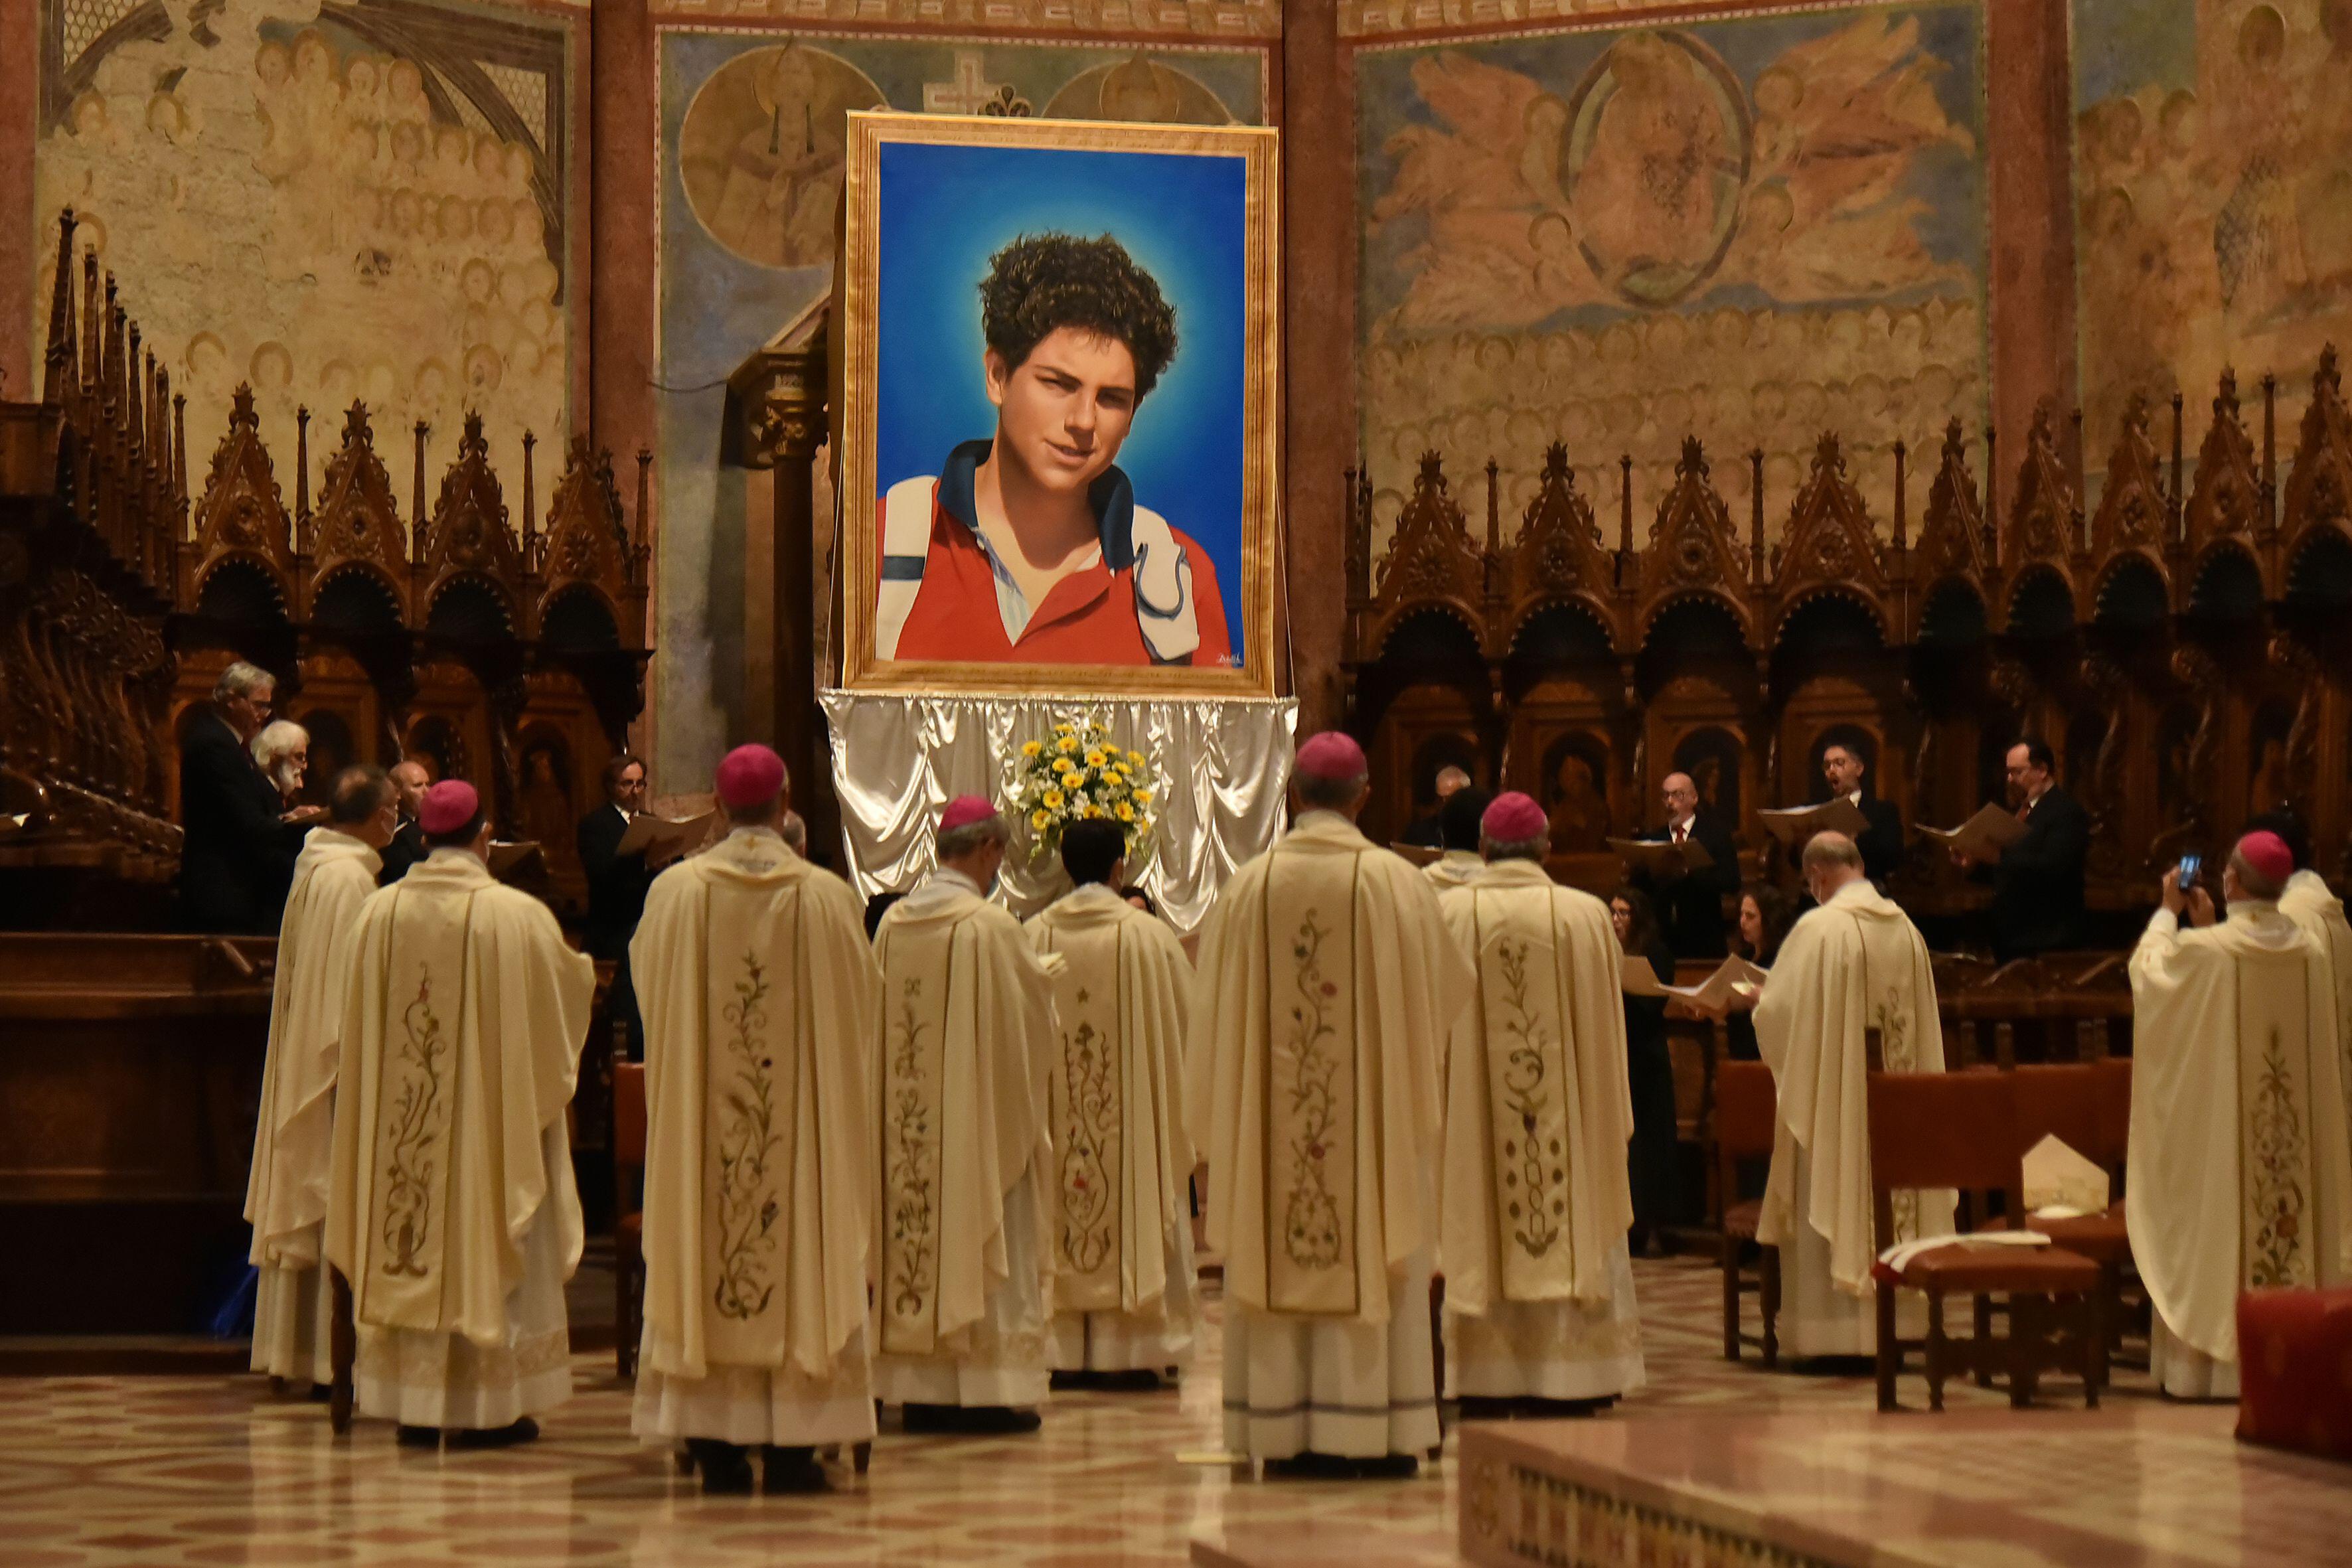 Carlo was beatified, the step before sainthood, in a 2020 ceremony in the Basilica of Saint Francis of Assisi